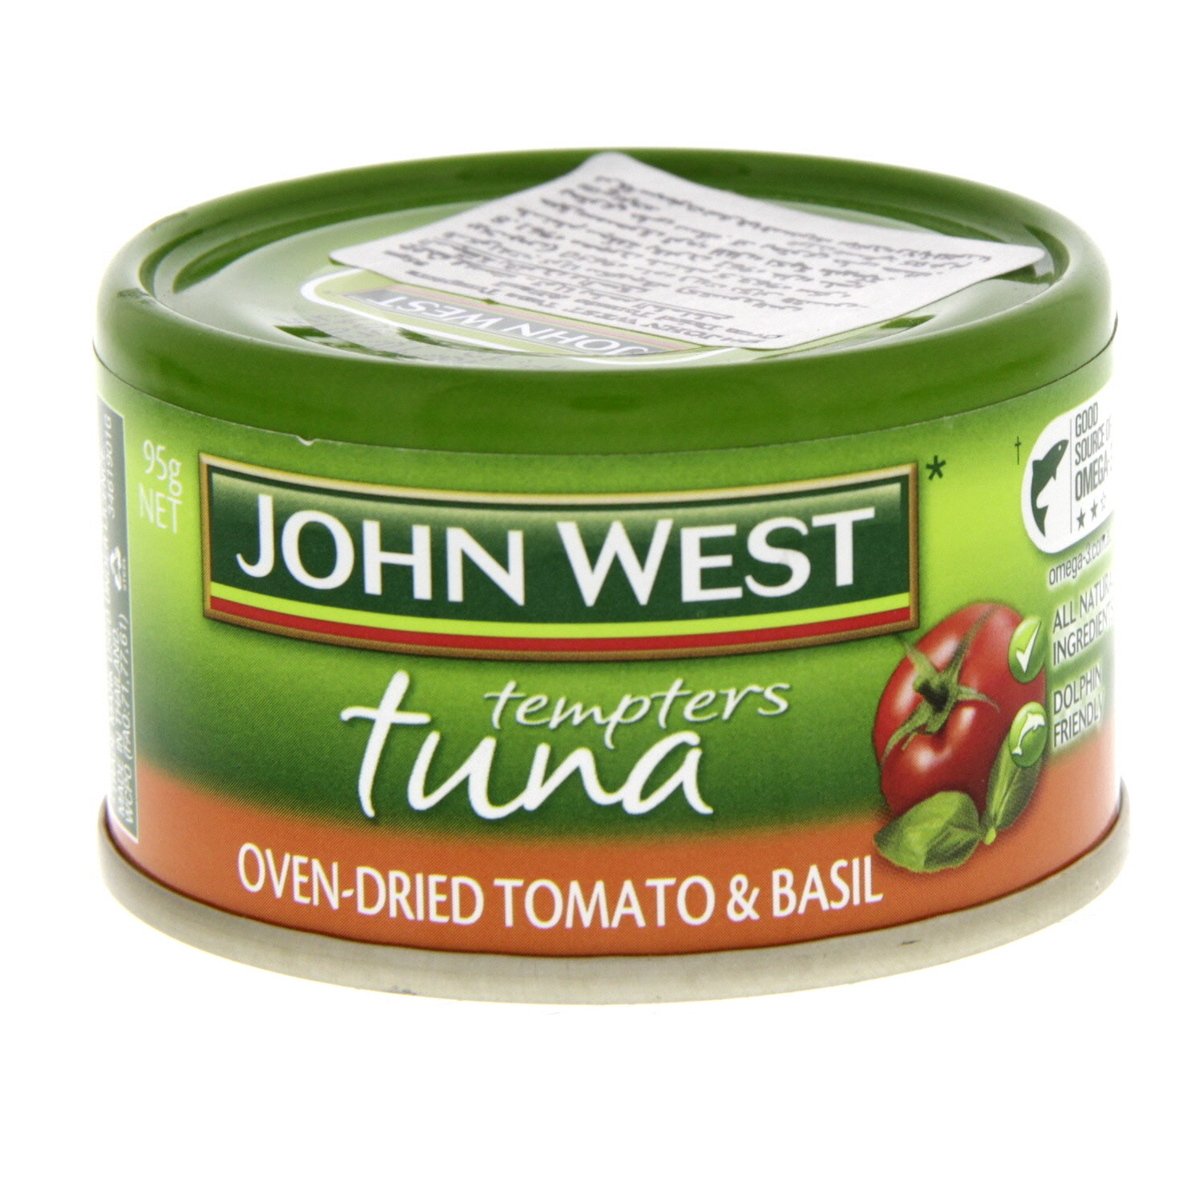 John West Tempters Tuna Oven-Dried Tomato And Basil 95 g